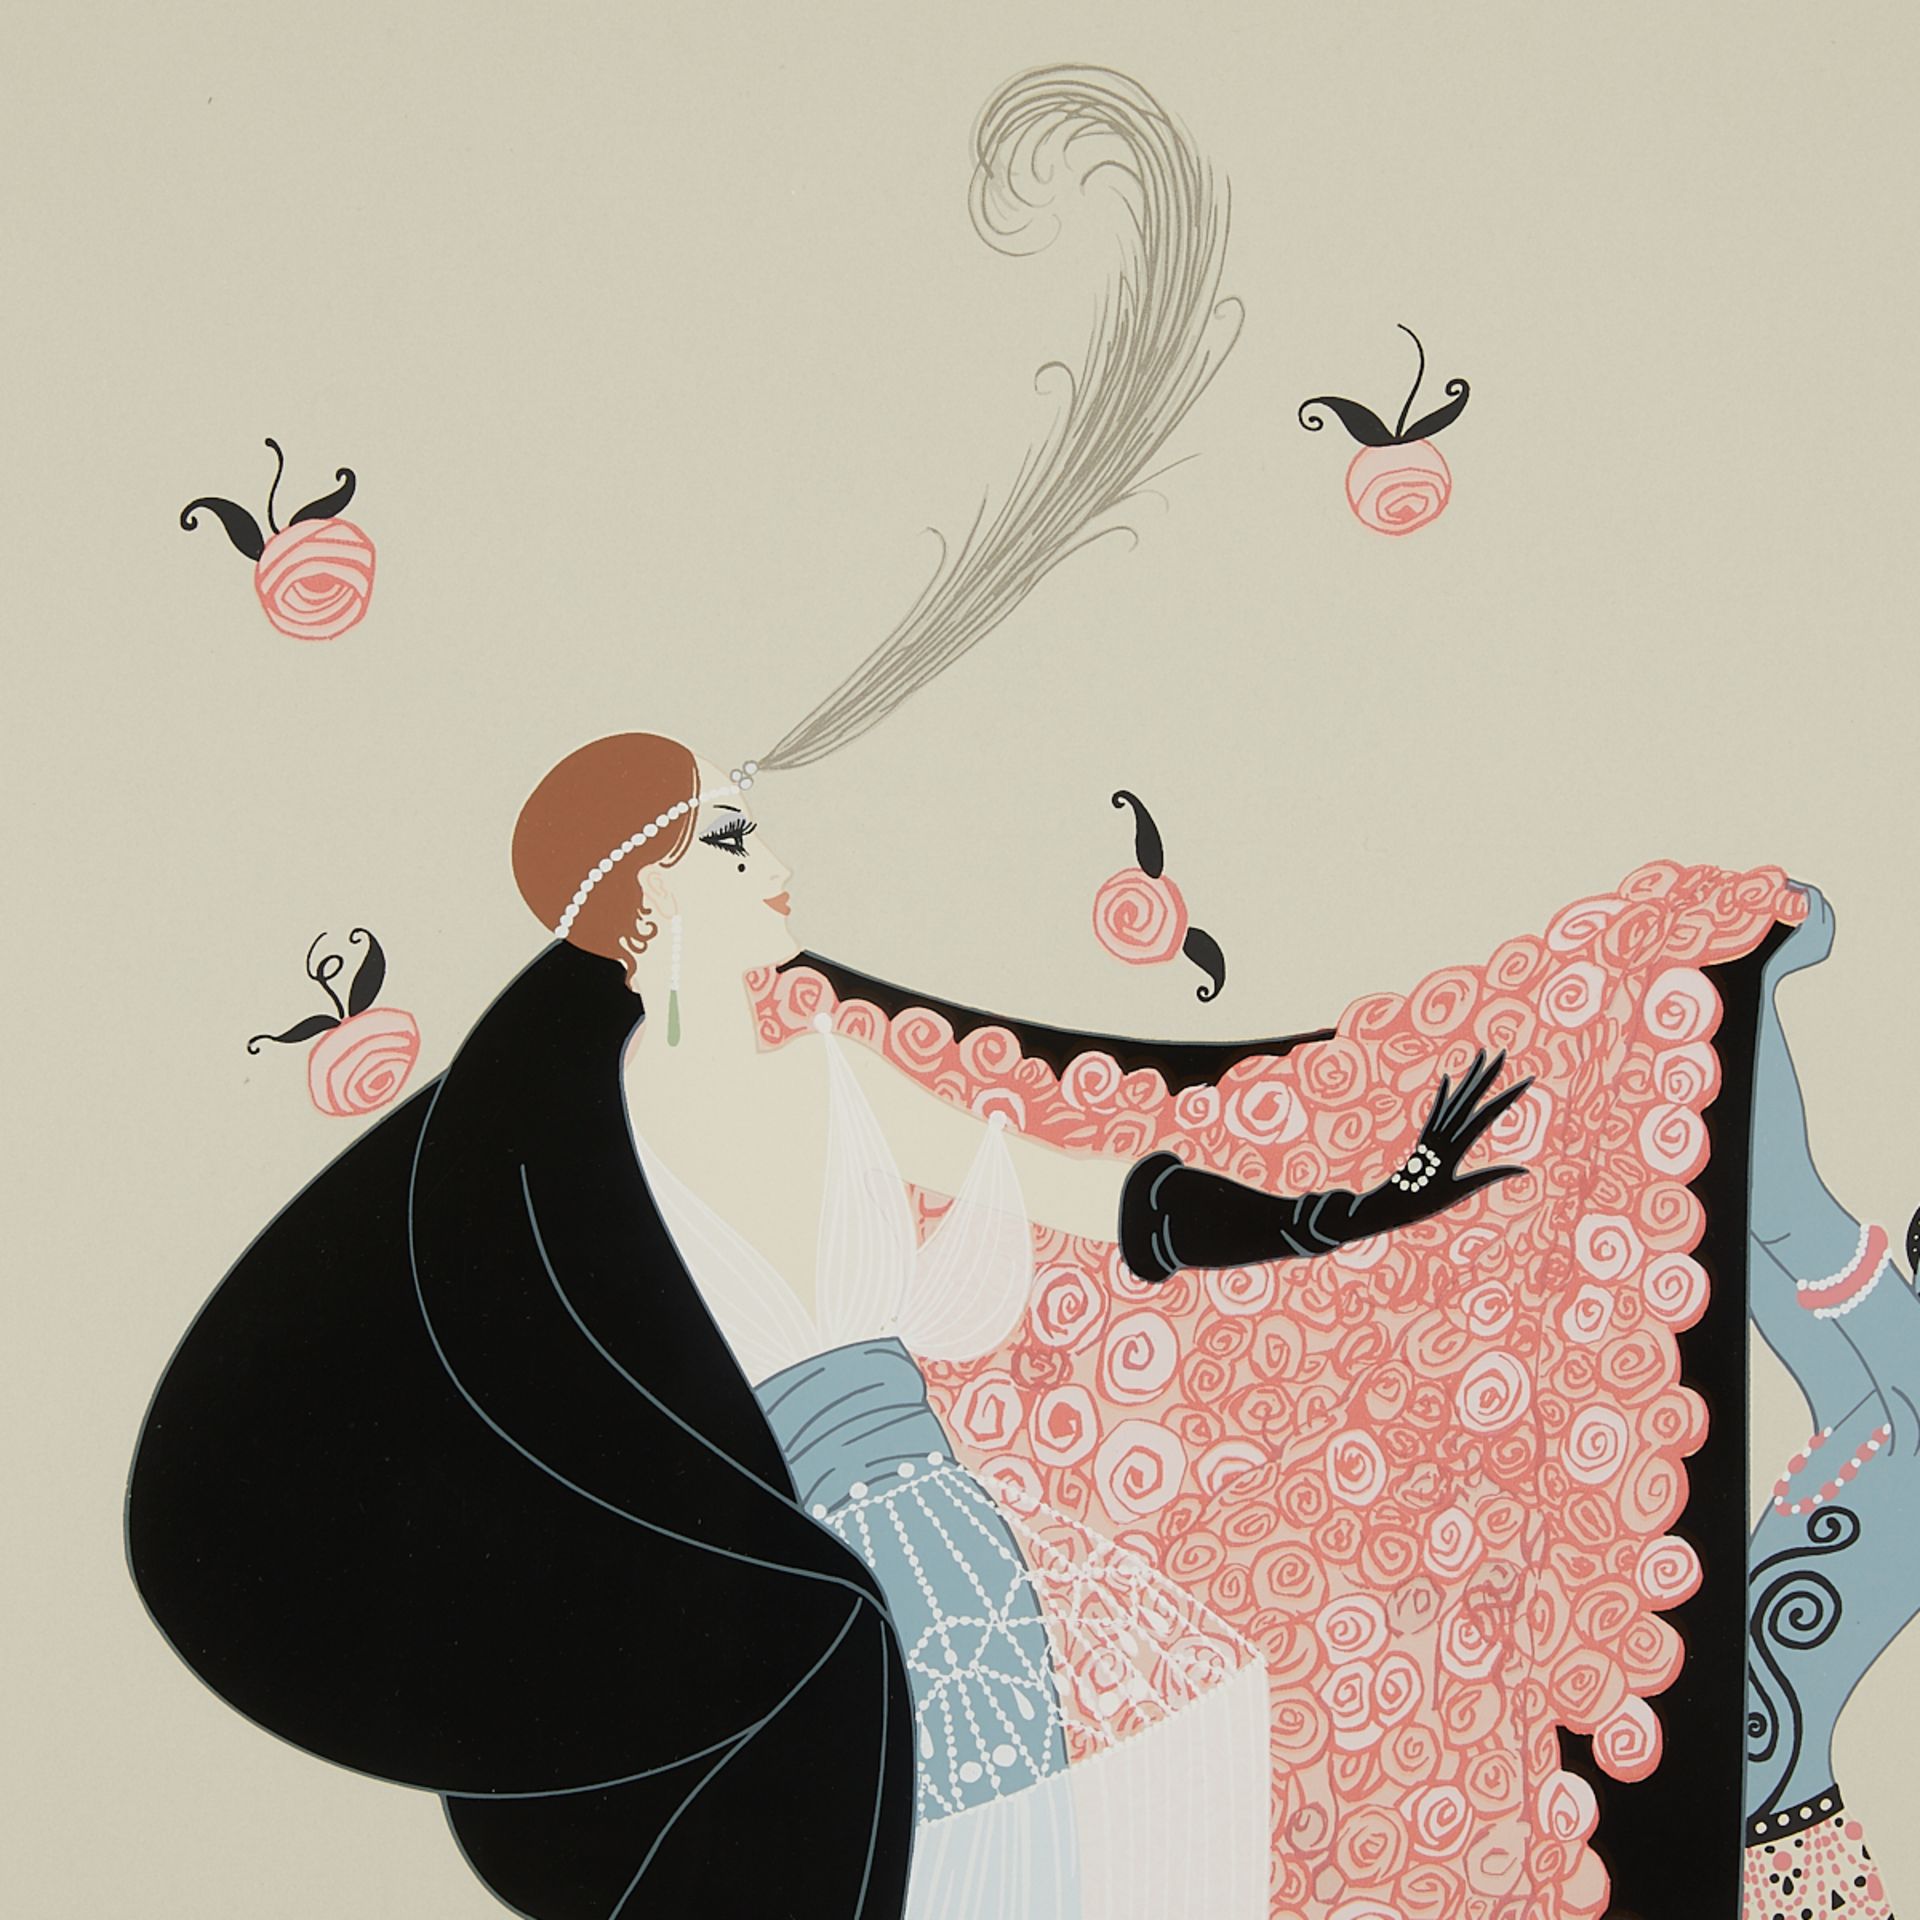 Erte "The Flowered Cape" Serigraph 1981 - Image 2 of 9